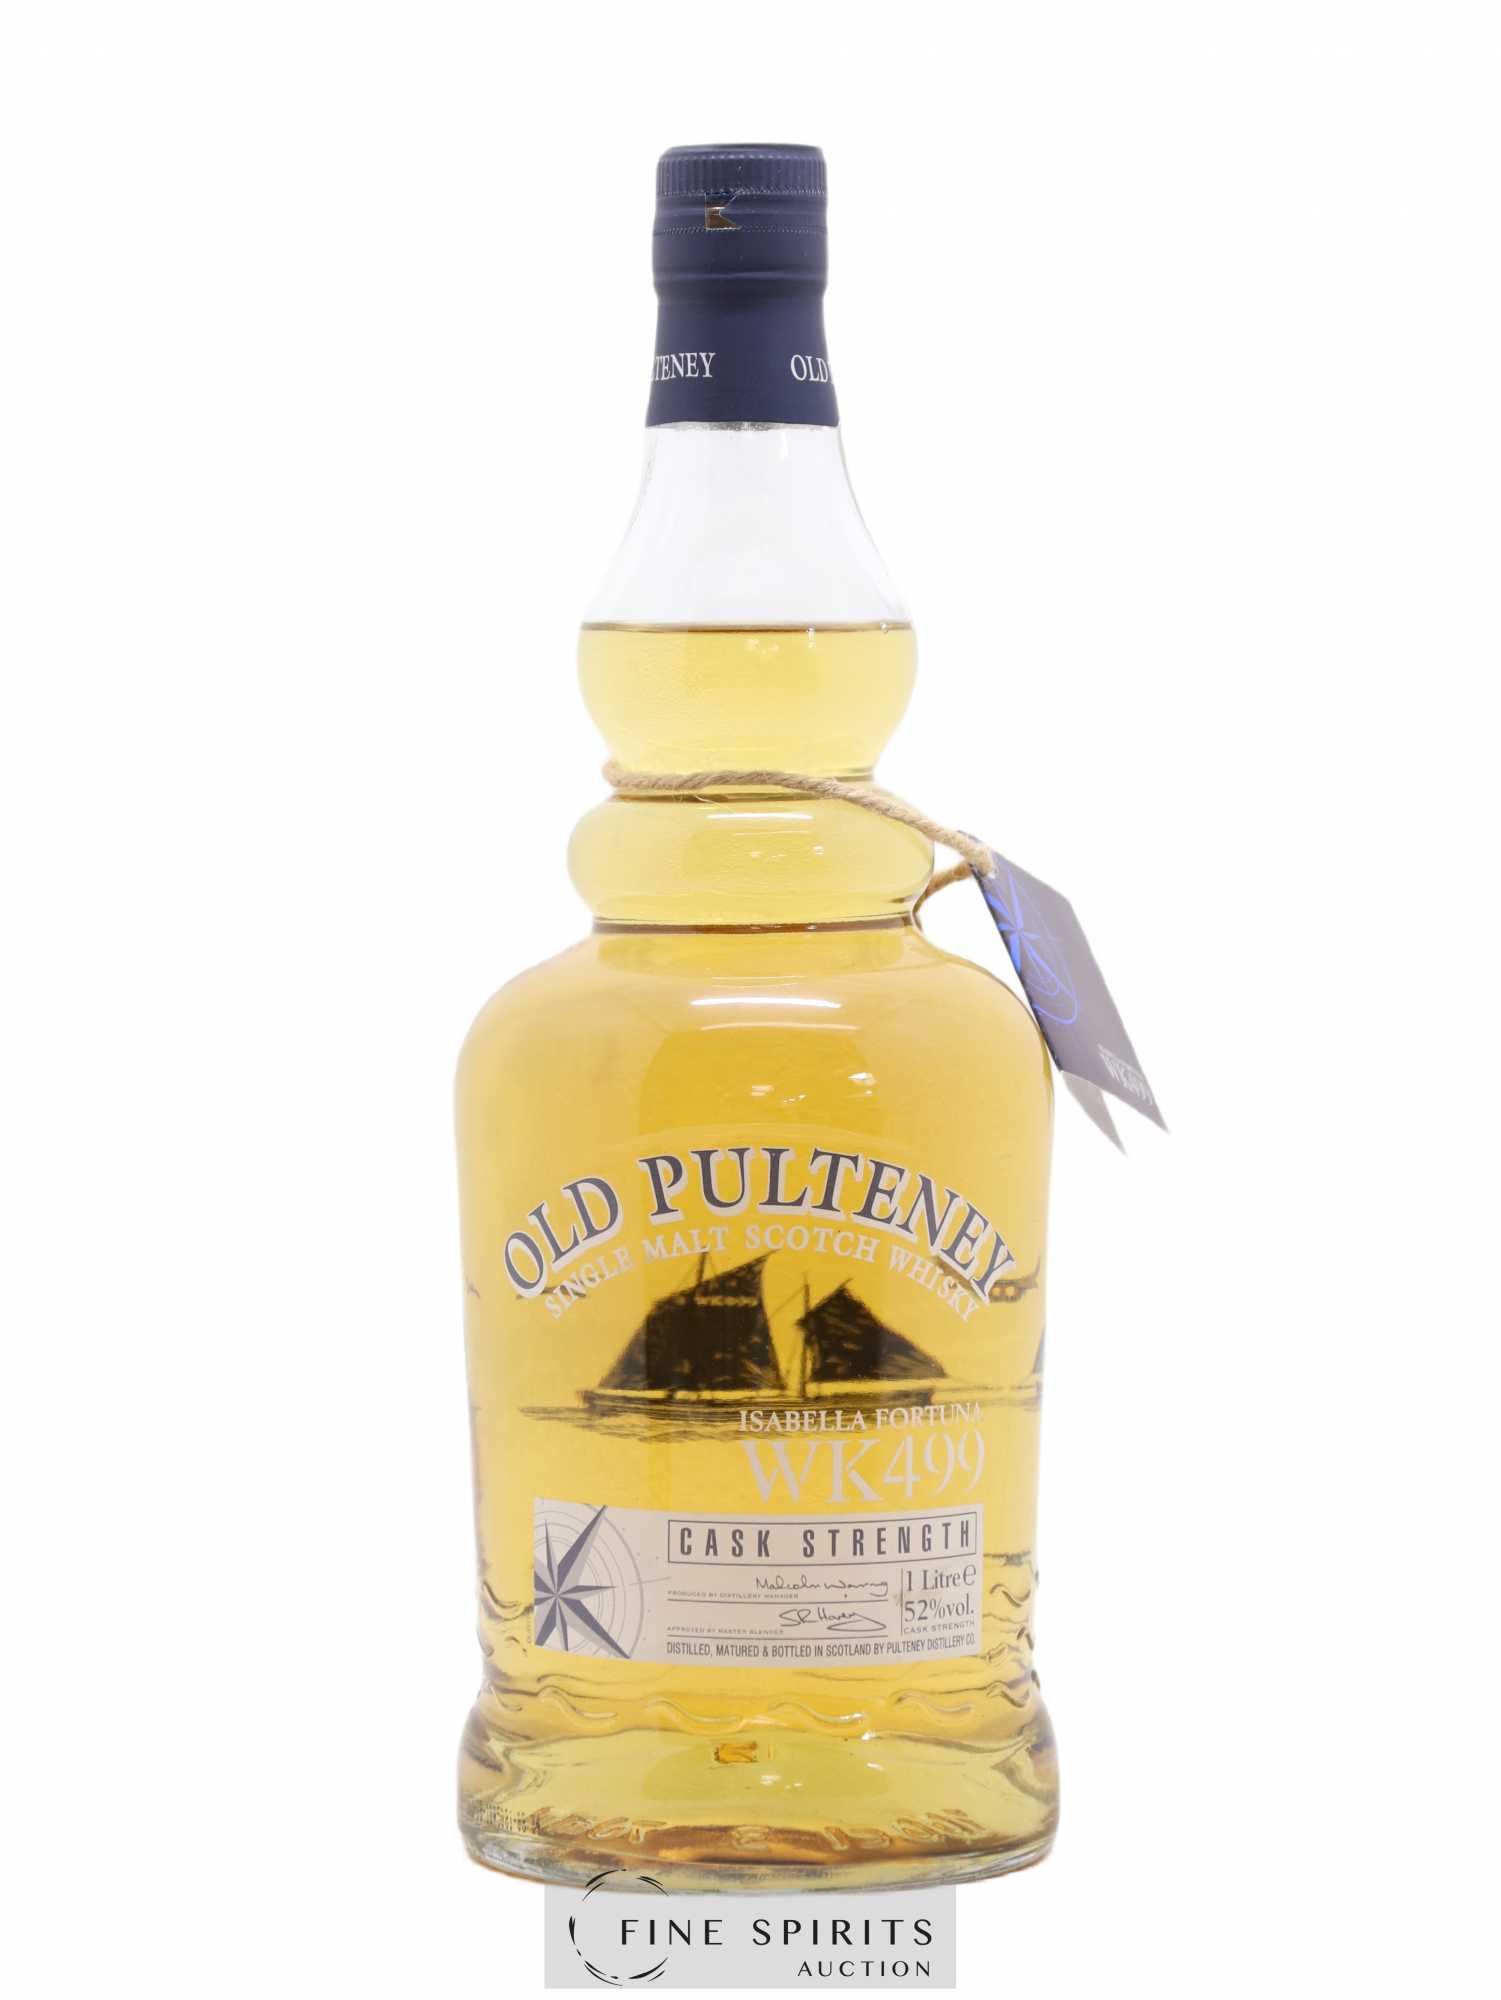 Old Pulteney Of. Isabella Fortuna WK499 Cask Strength 